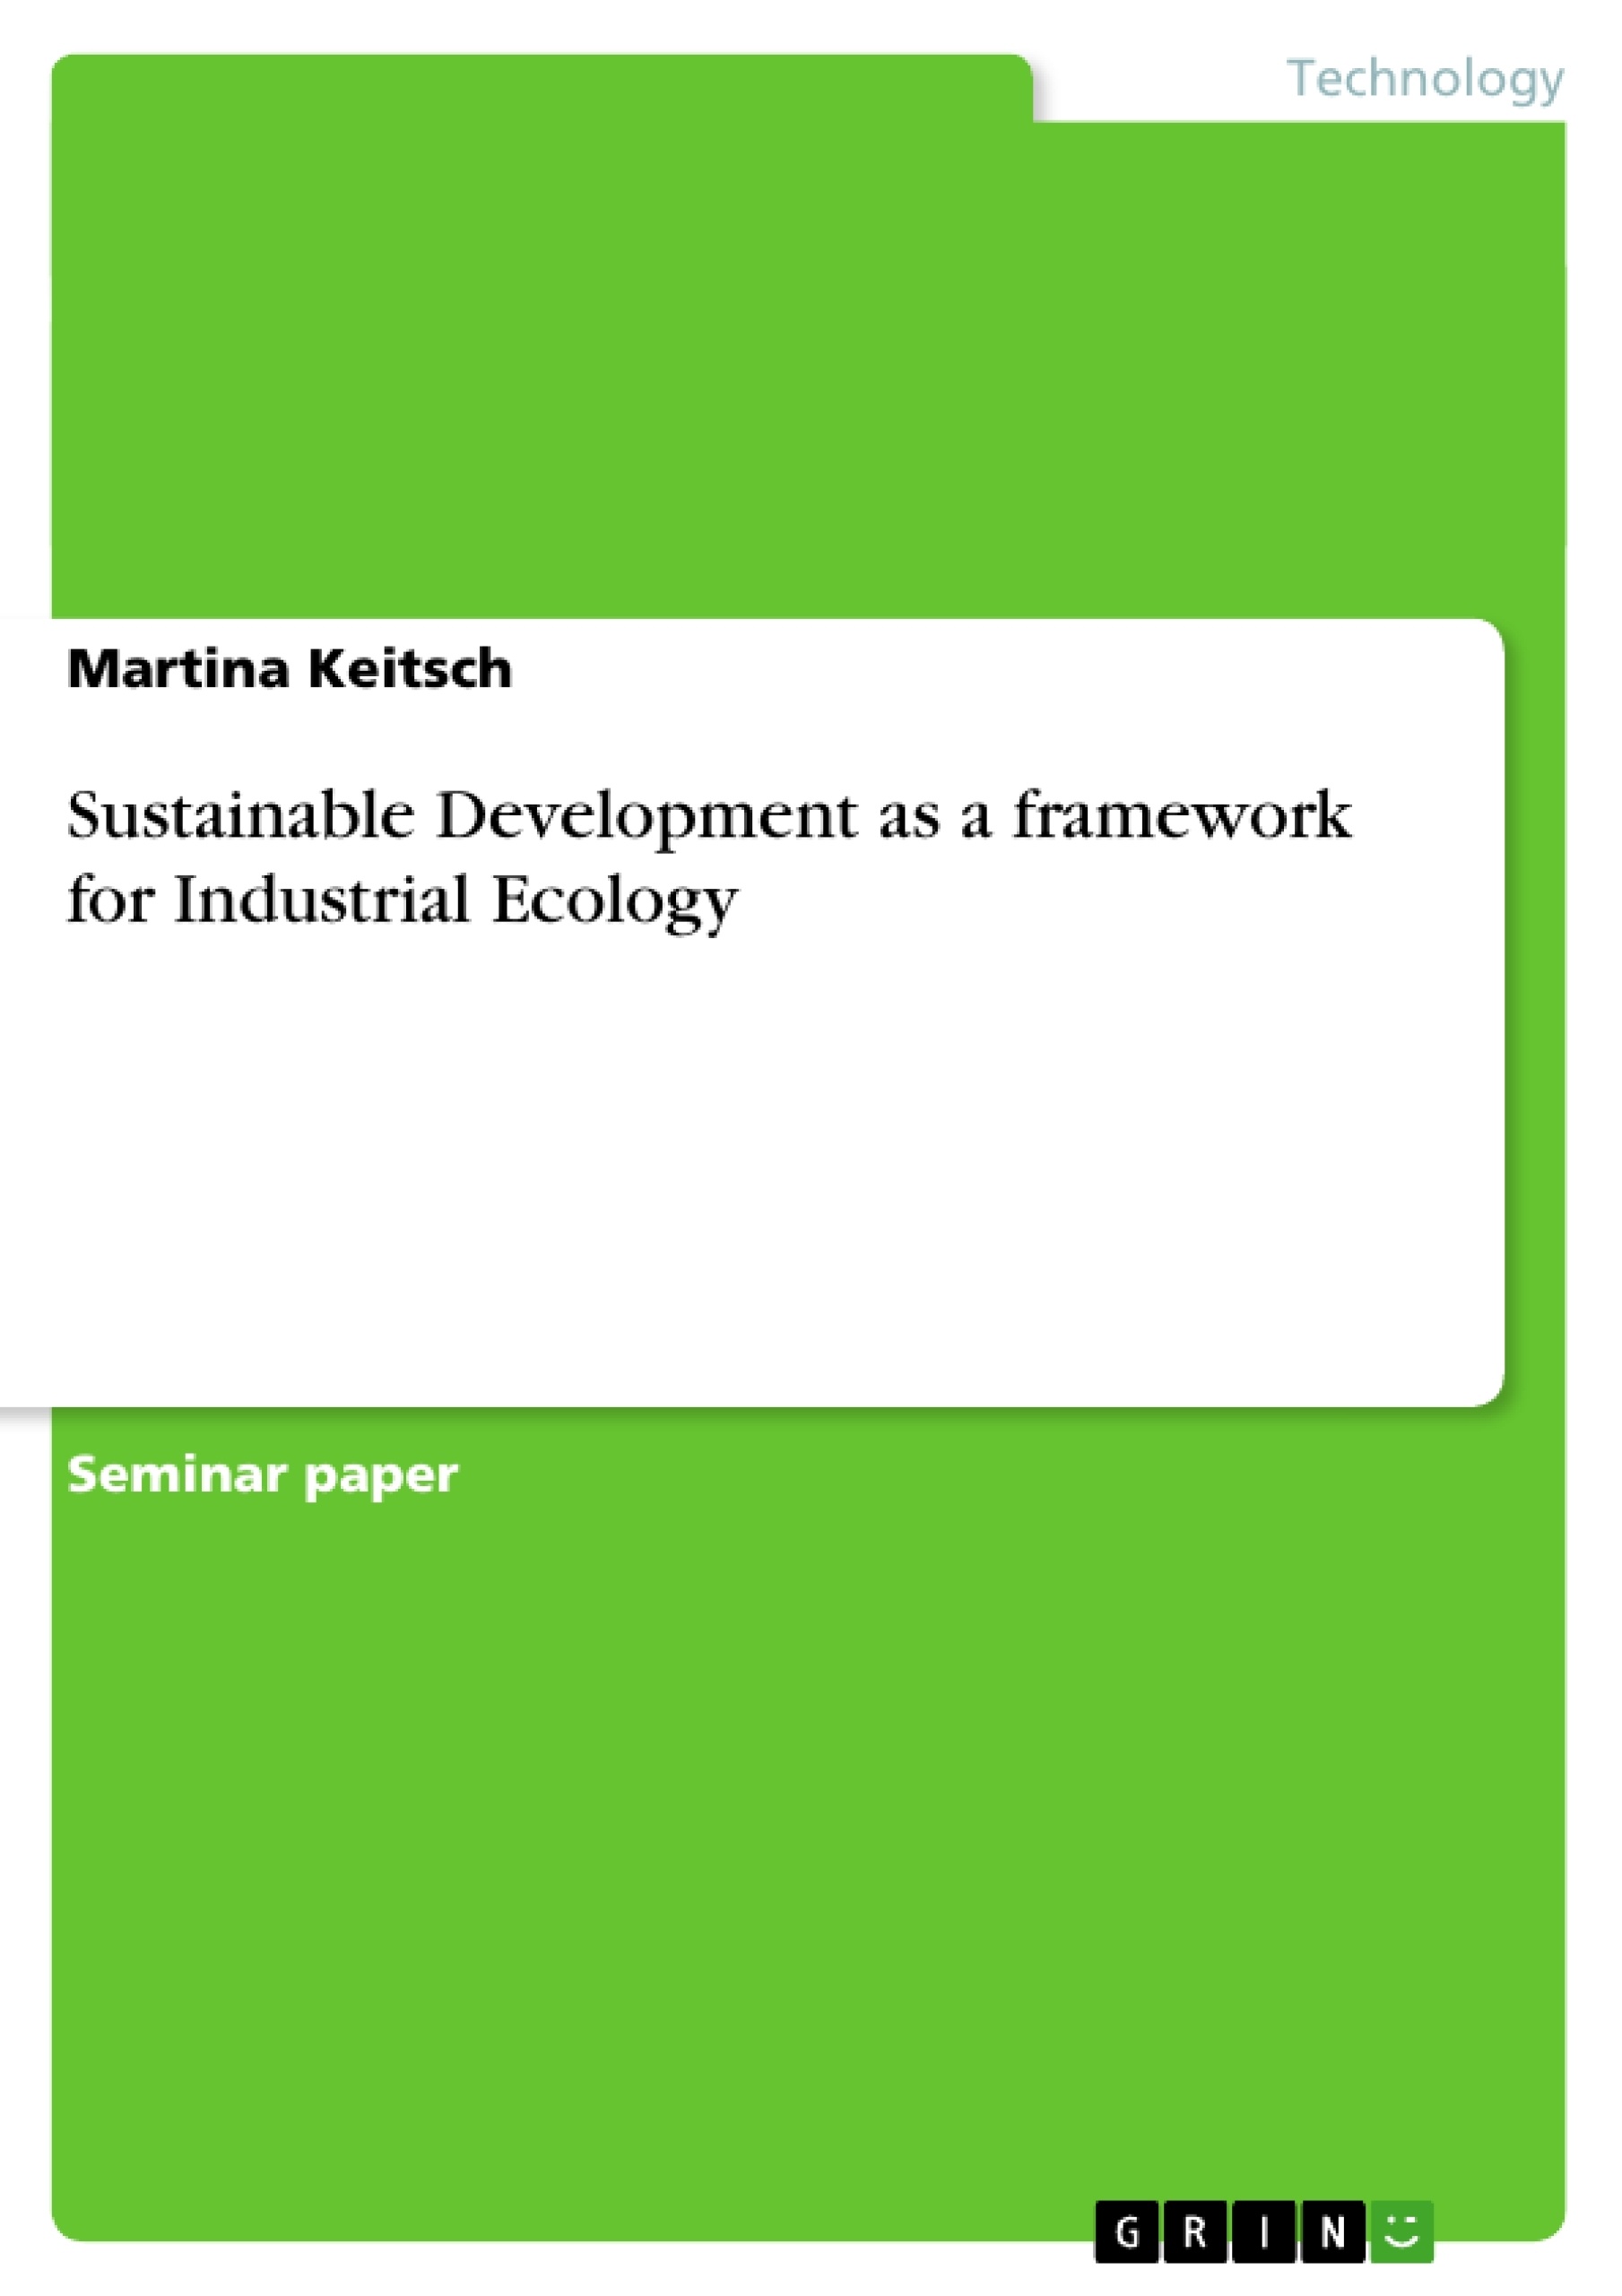 Title: Sustainable Development as a framework for Industrial Ecology